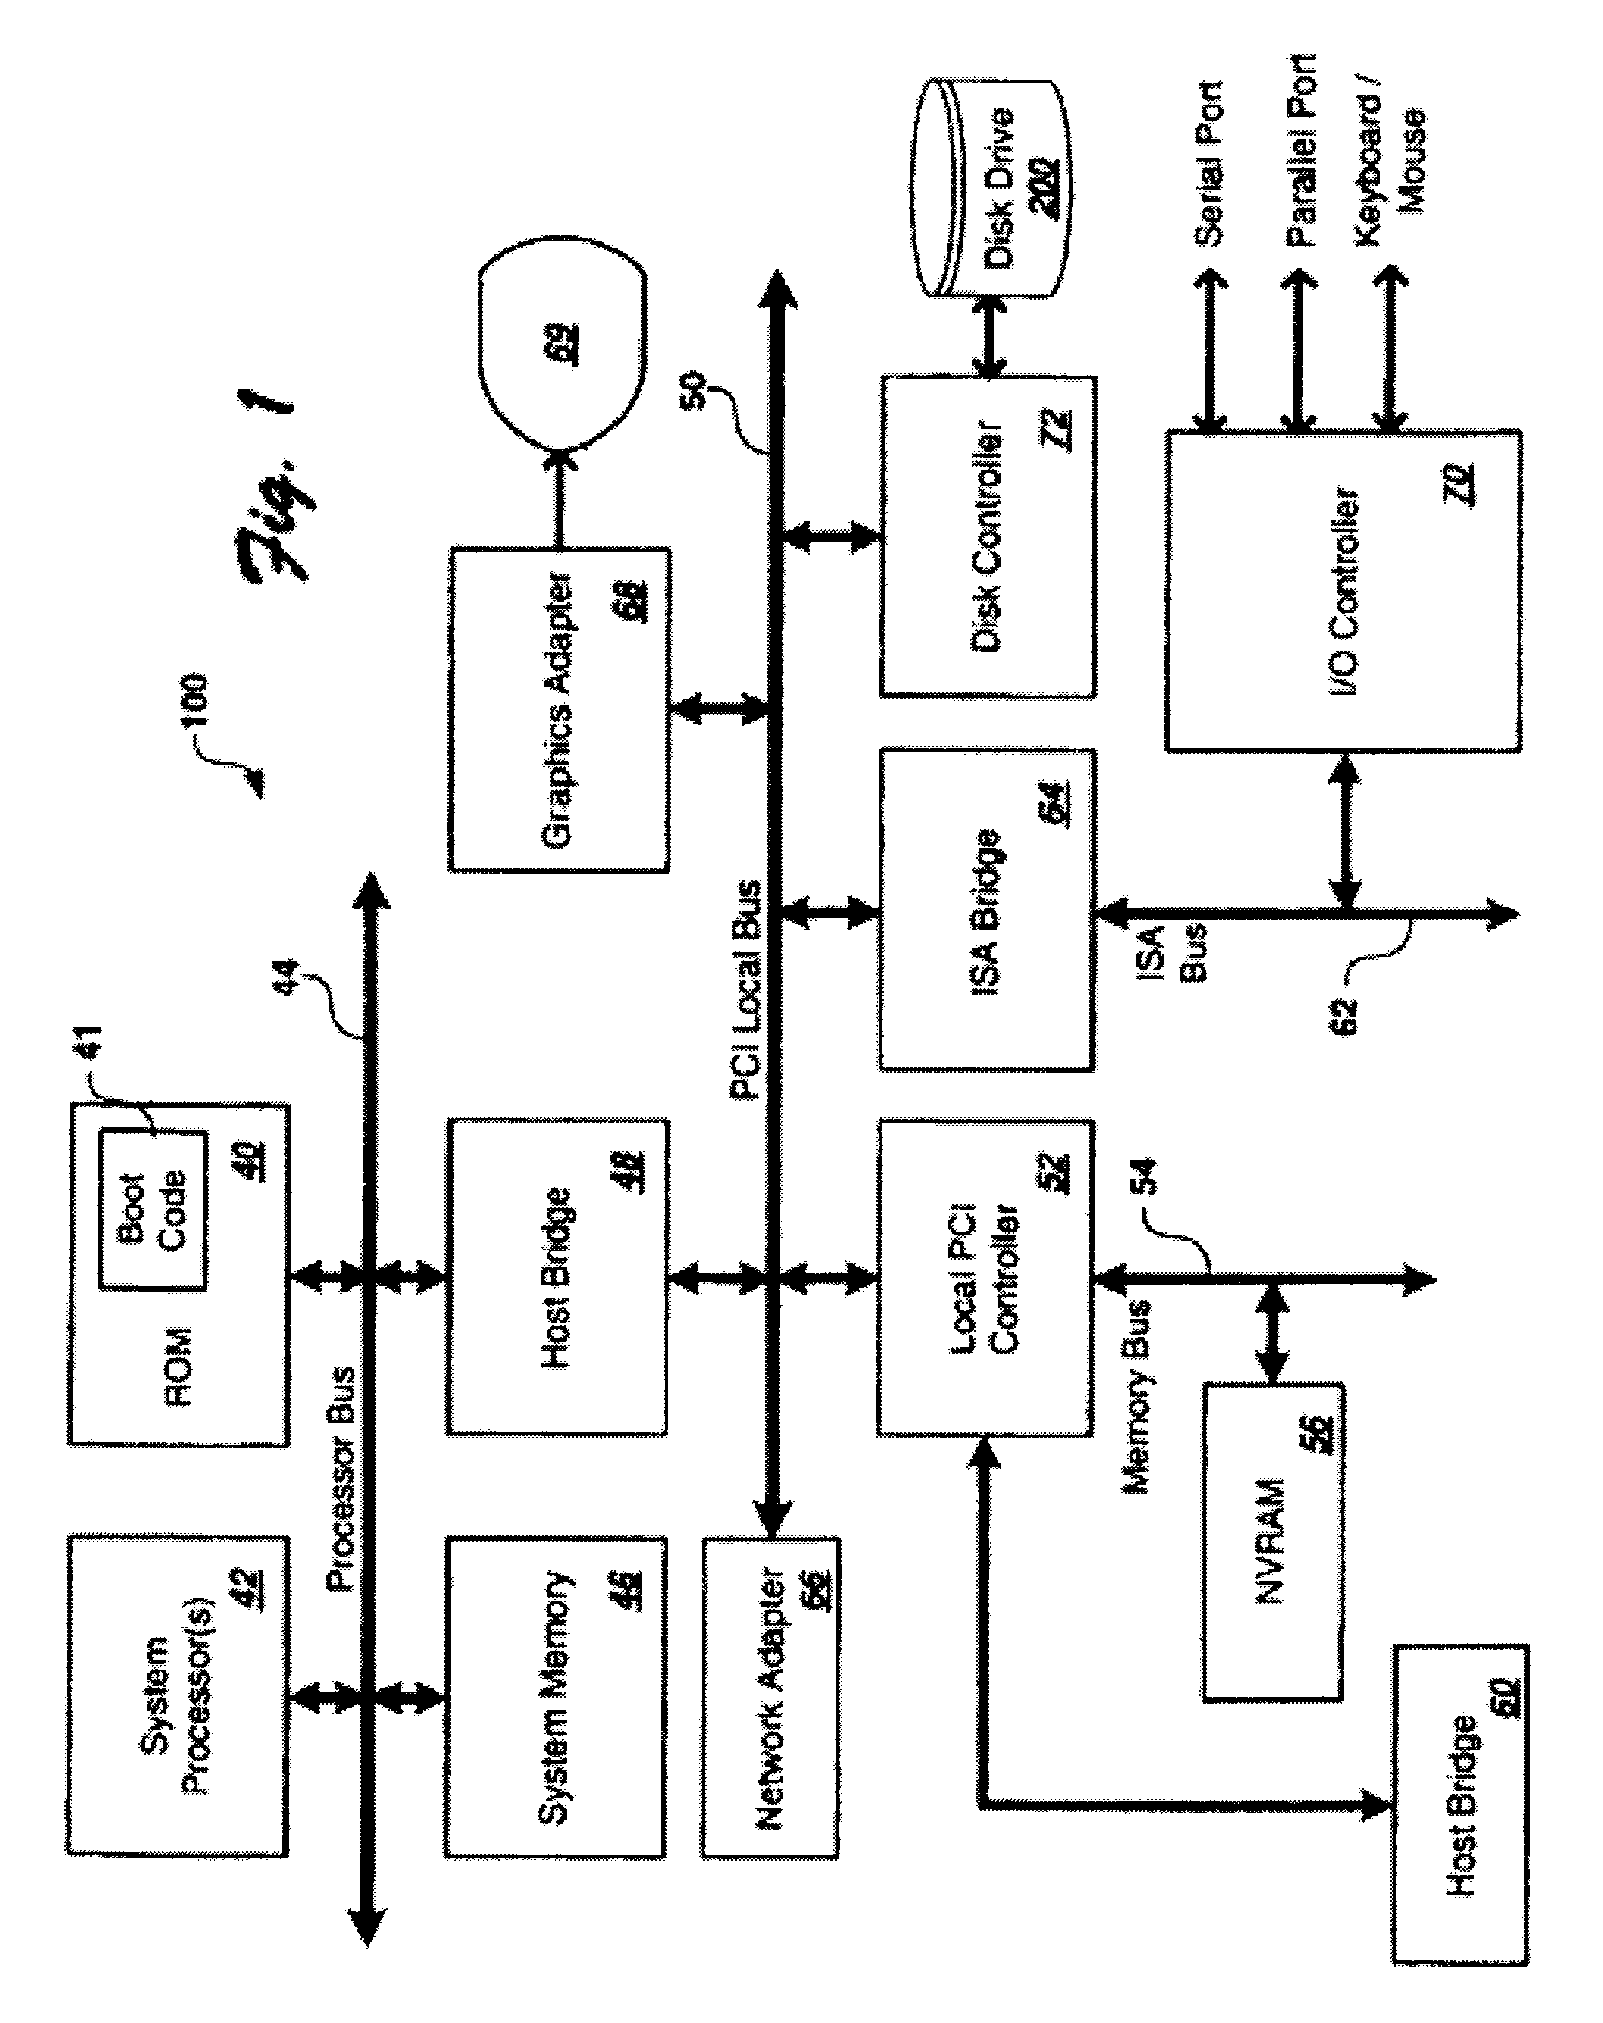 Method for power capping with co-operative dynamic voltage and frequency scaling via shared p-state table